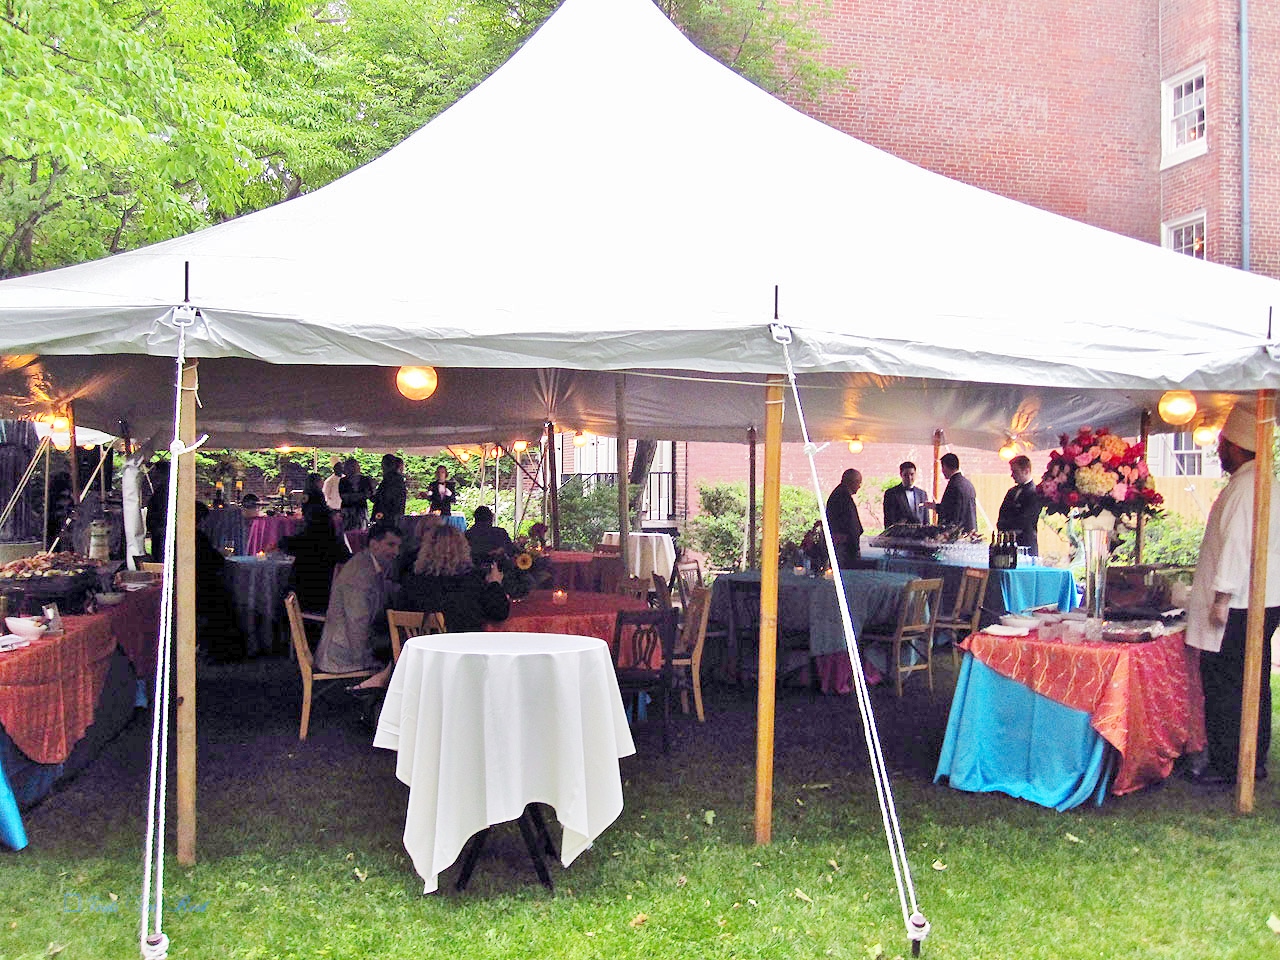 Rent a tent for your graduation party